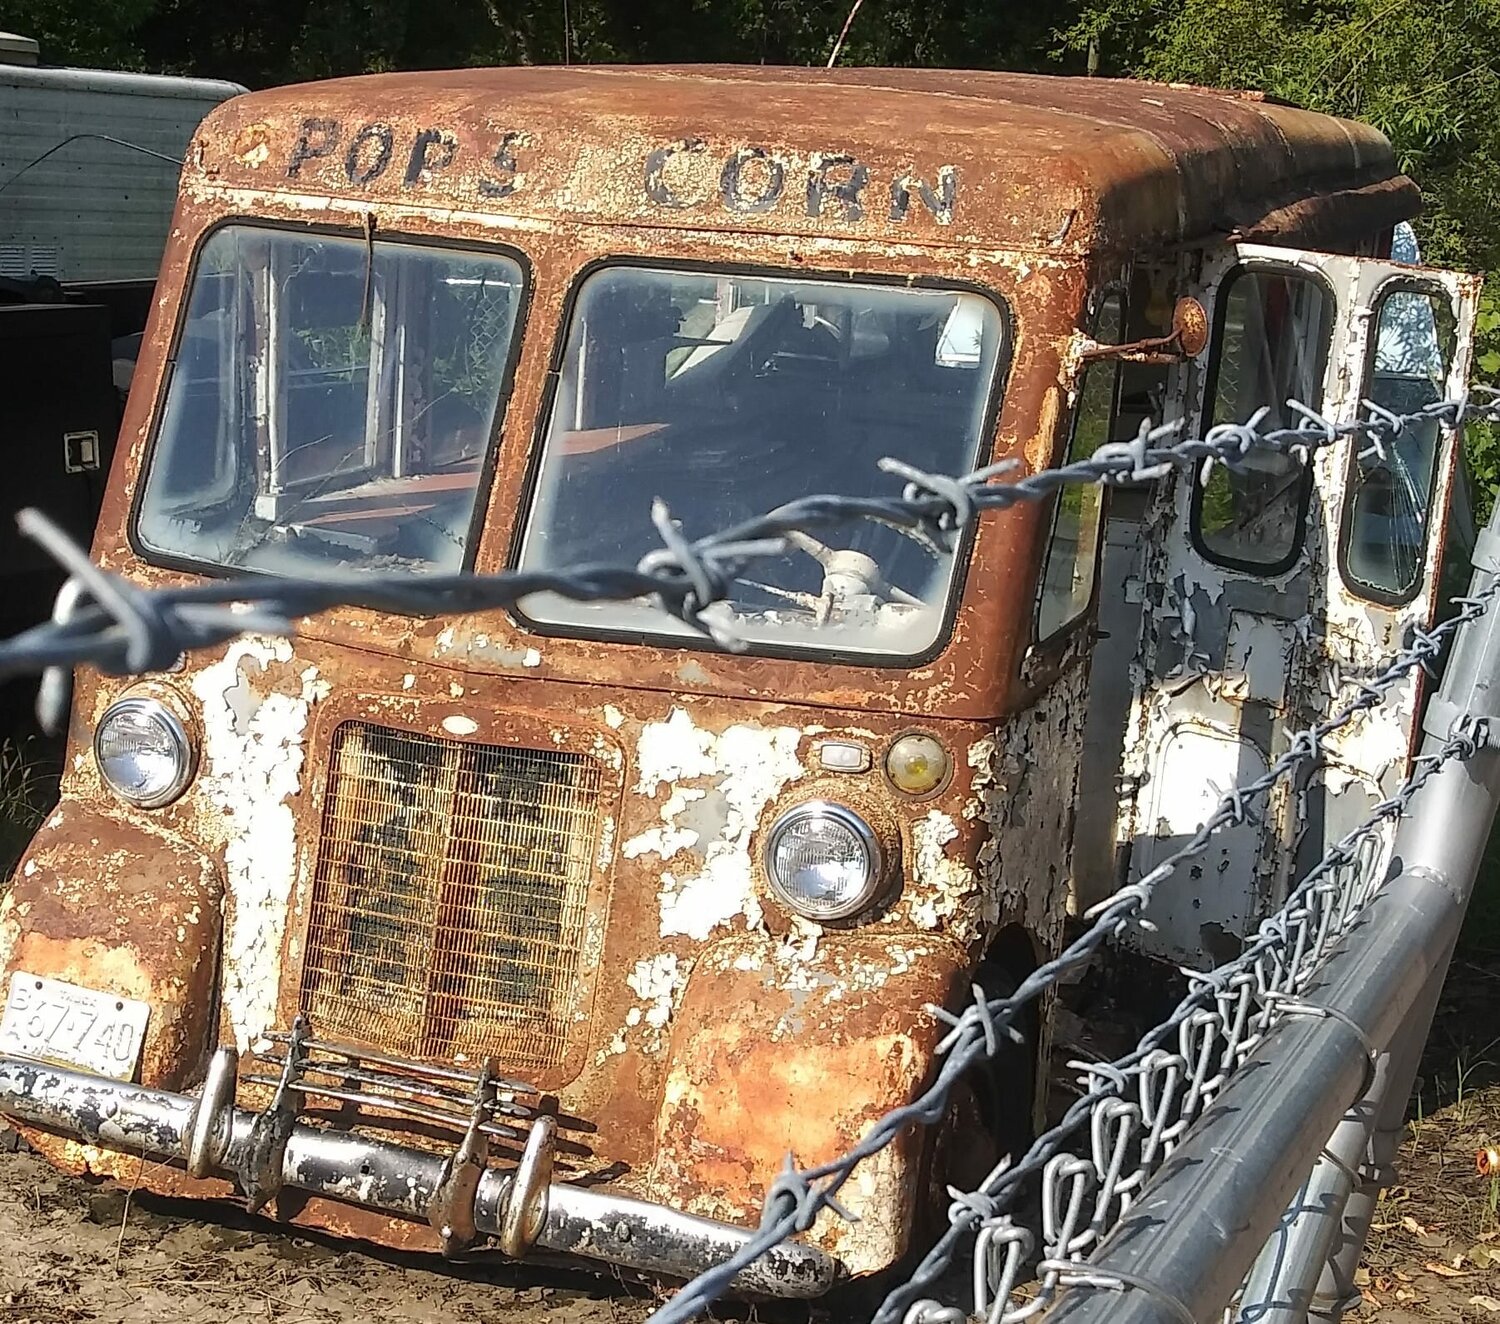 Poptcorn, or Pop’s Corn, has been rusting away for close to 20 years in Jerry’s parking lot on Main Street. A group of dedicated community volunteers vows to restore the old snack wagon to its former glory.